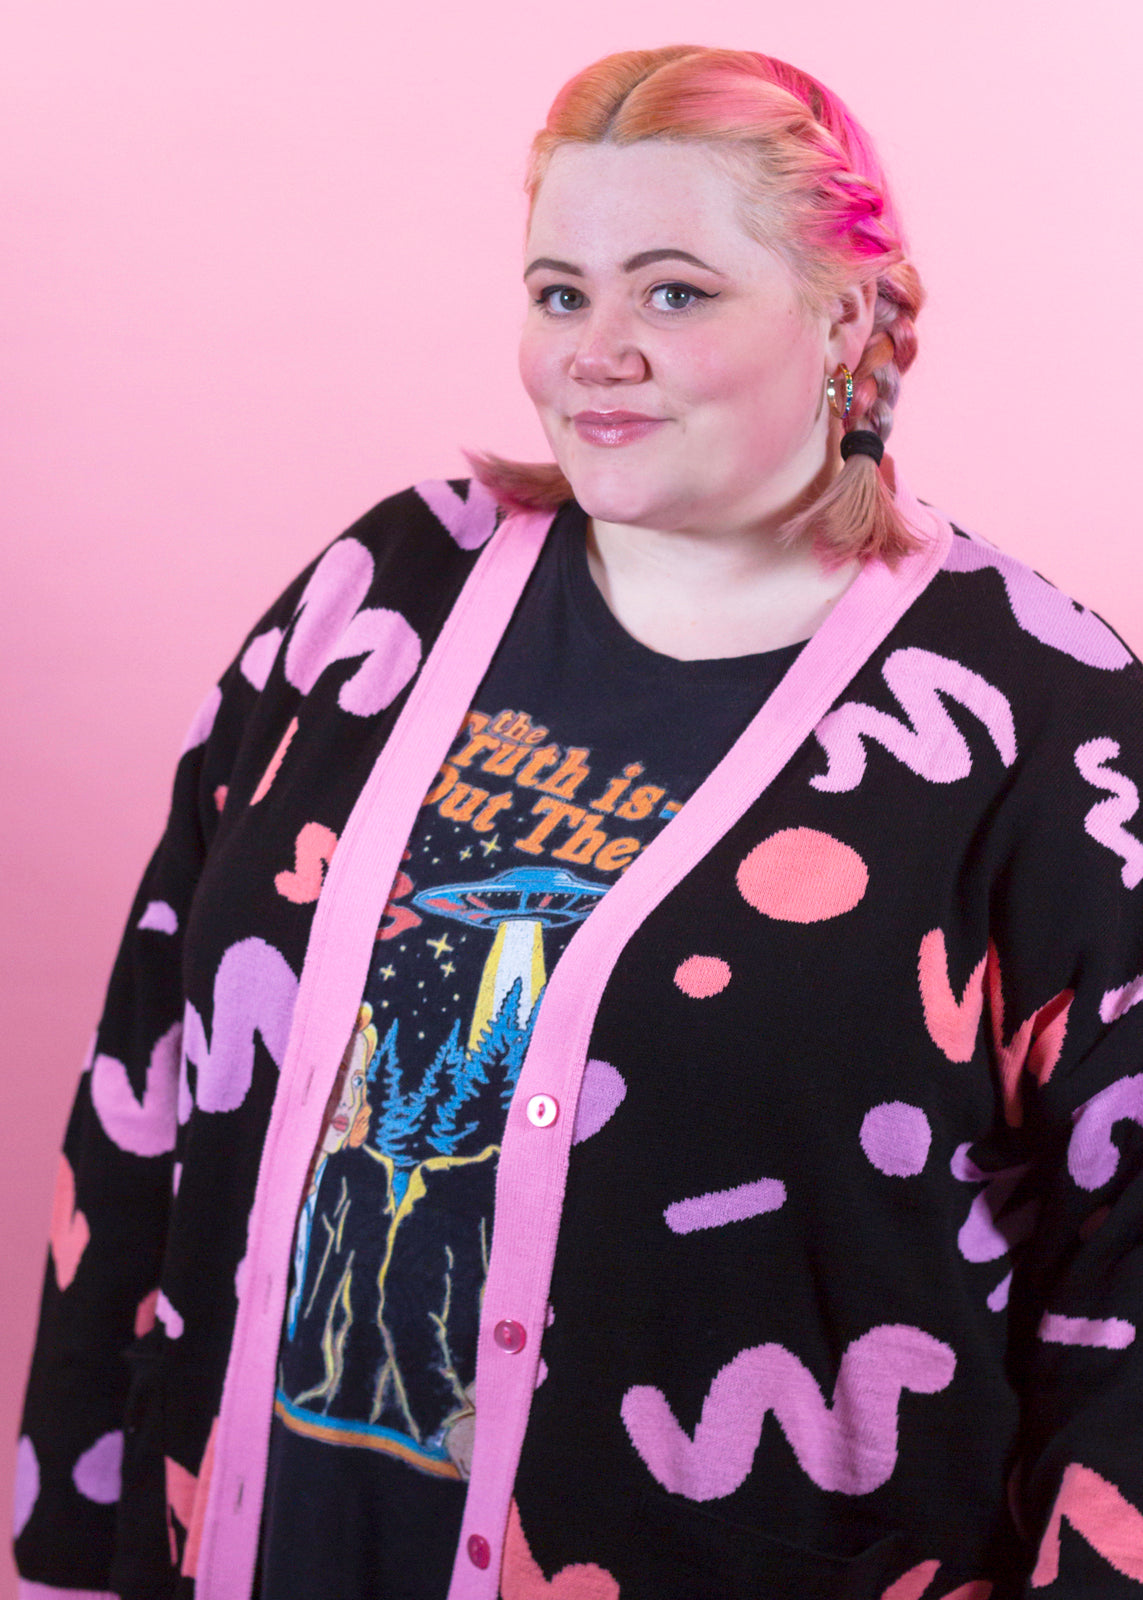 Home of Rainbows - Pink Squiggle Knit Cardigan